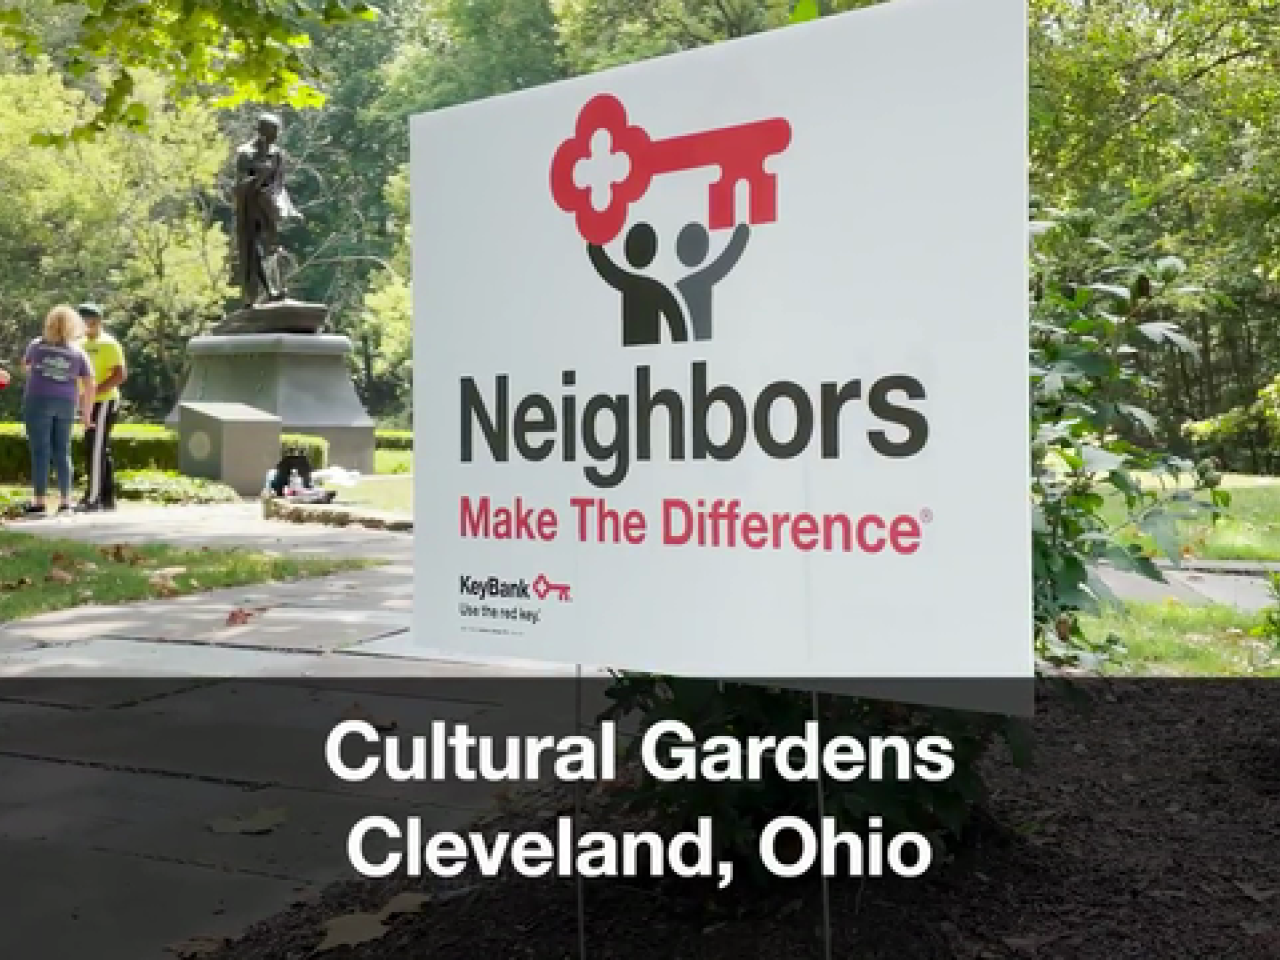 Sign in park reading, "Neighbors Make The Difference"